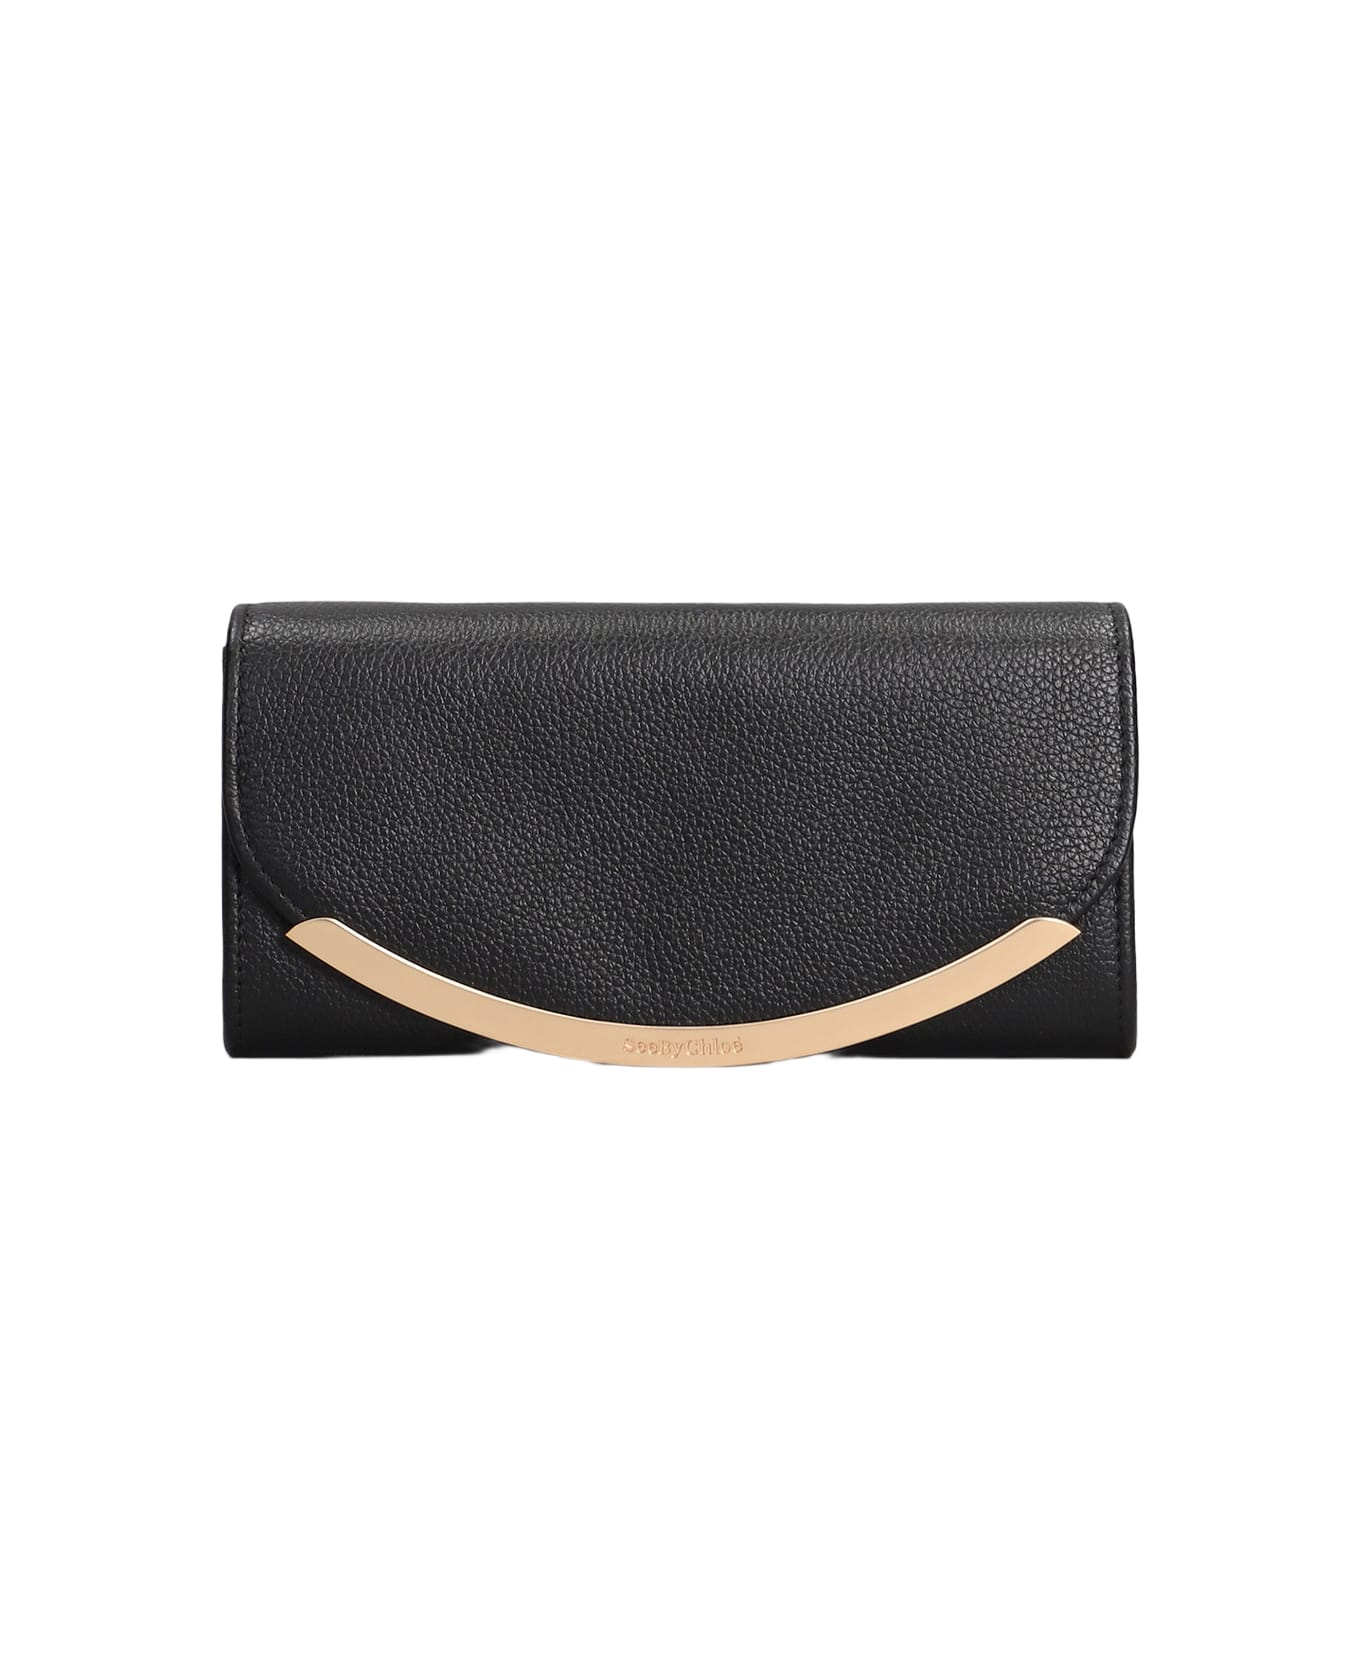 See by Chloé Lizzie Wallet In Black Leather - black